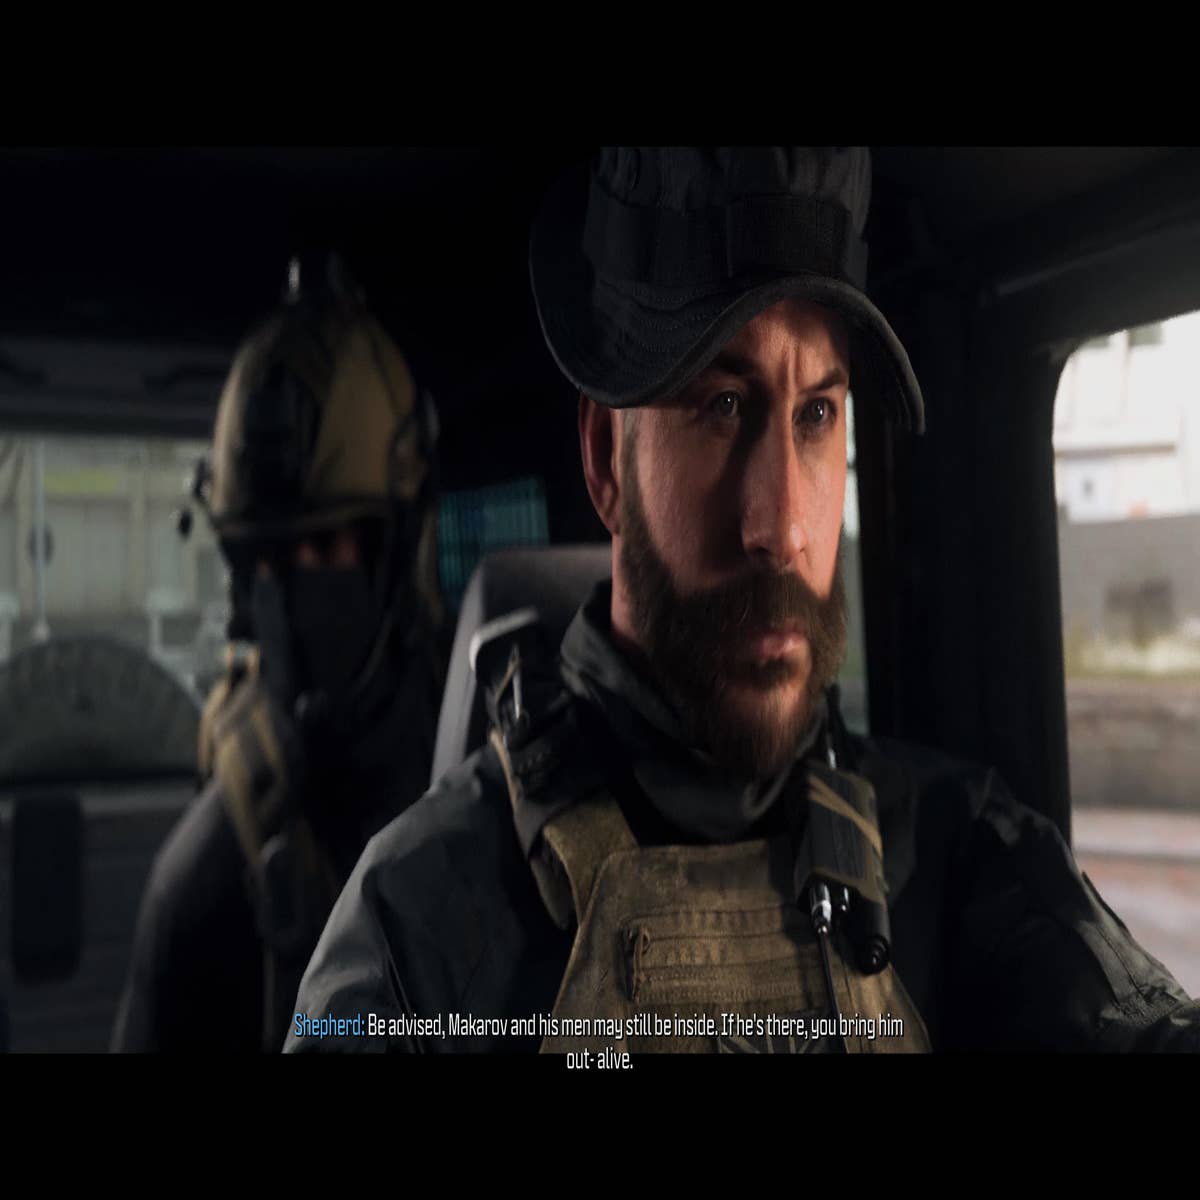 Call of Duty: Modern Warfare 3 (2023) review - video games can do better